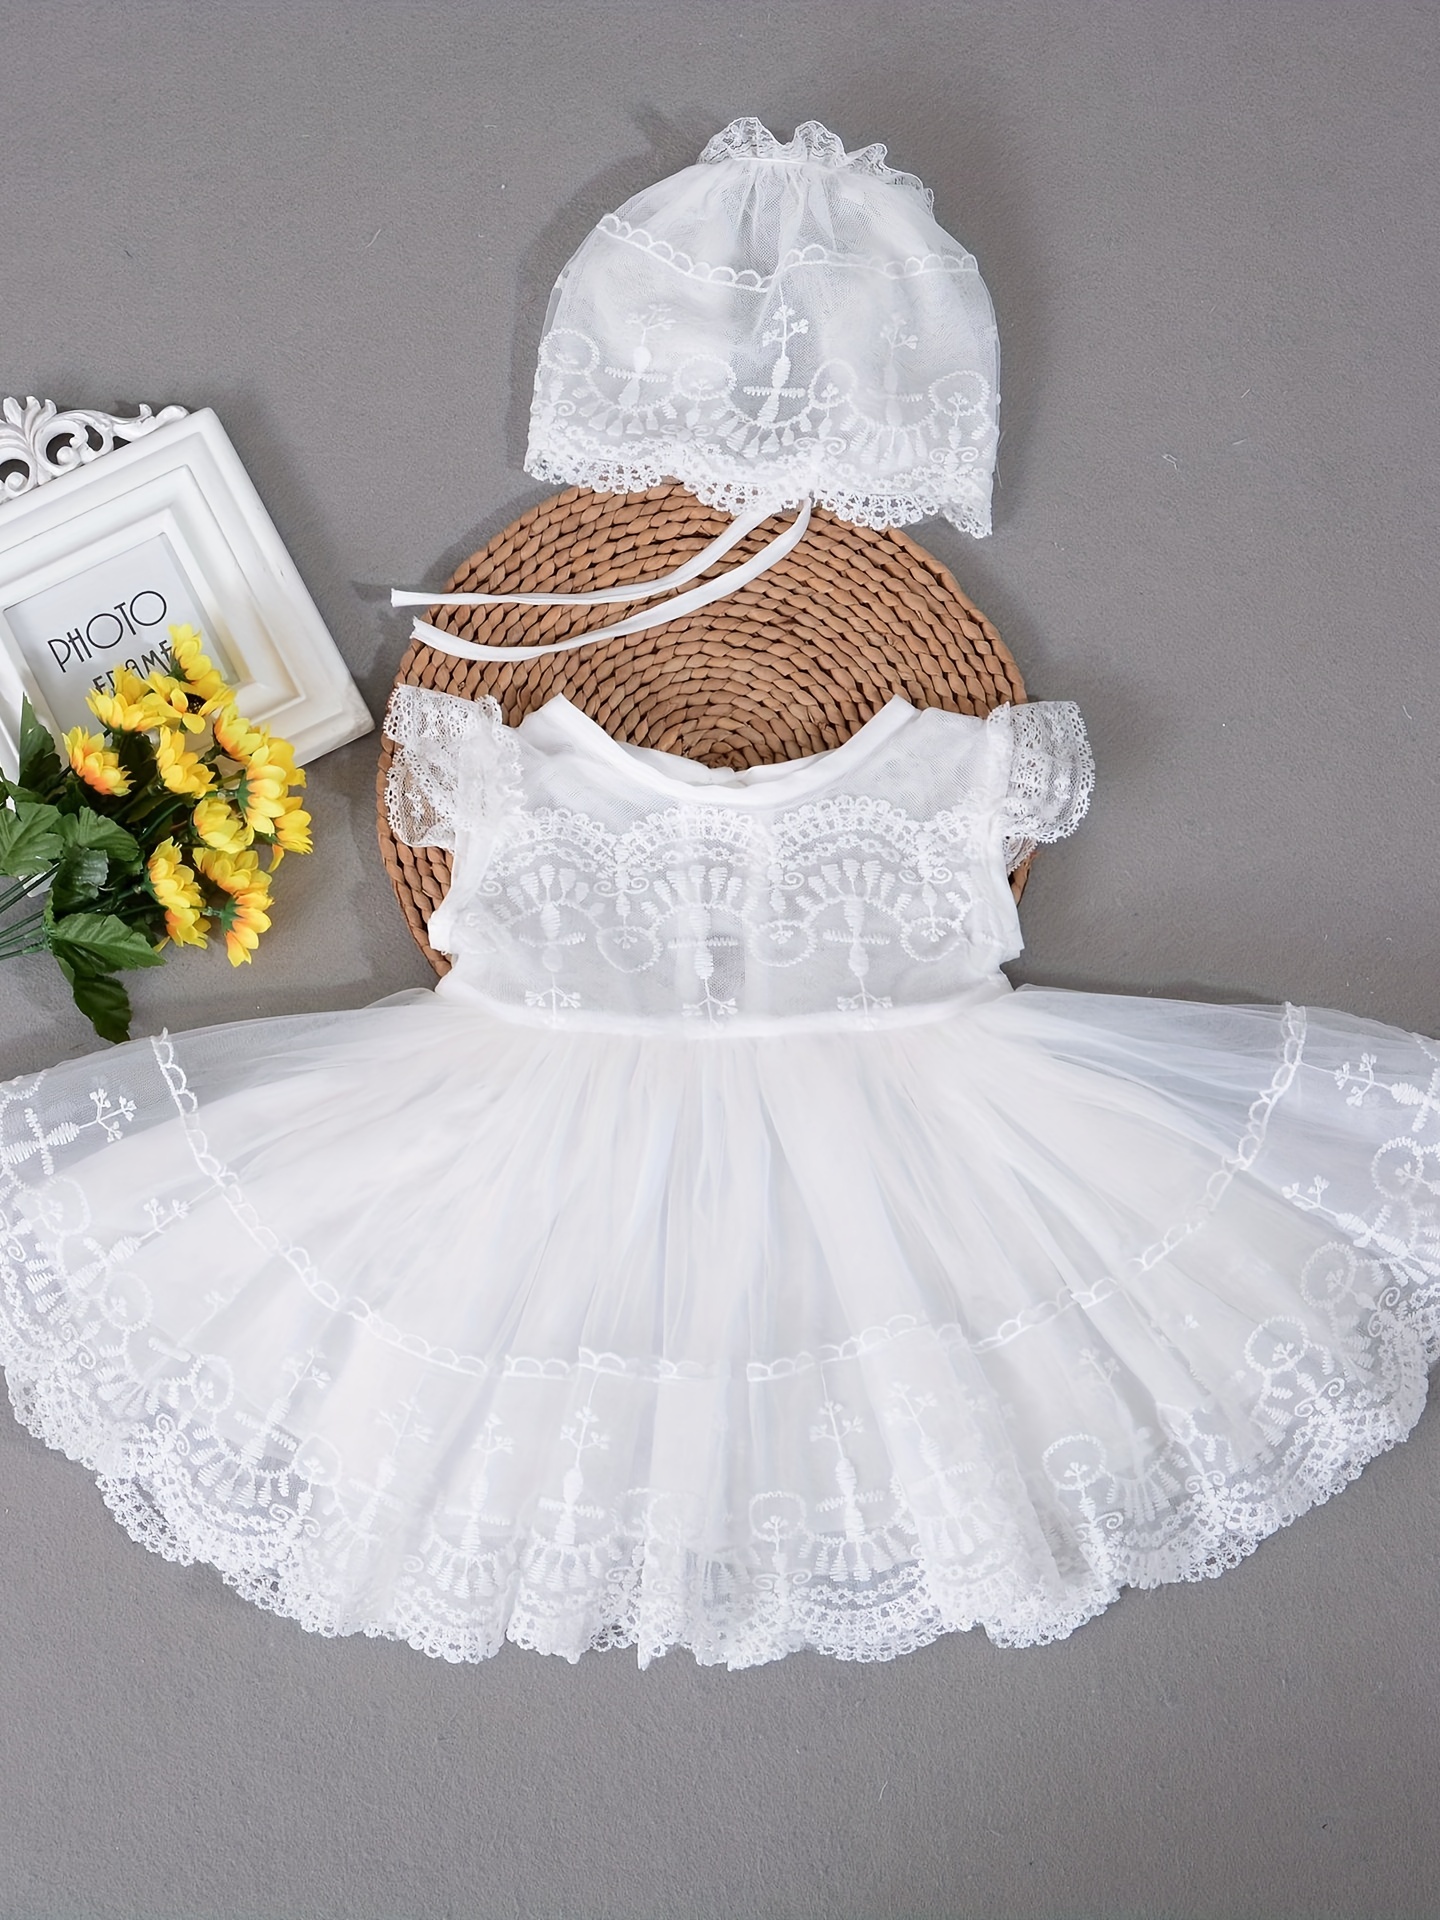 Baby's Gorgeous Gown Dress, Girl's Wedding Birthday Party Dress, Children's  Lace Princess Dress, Coquette Style